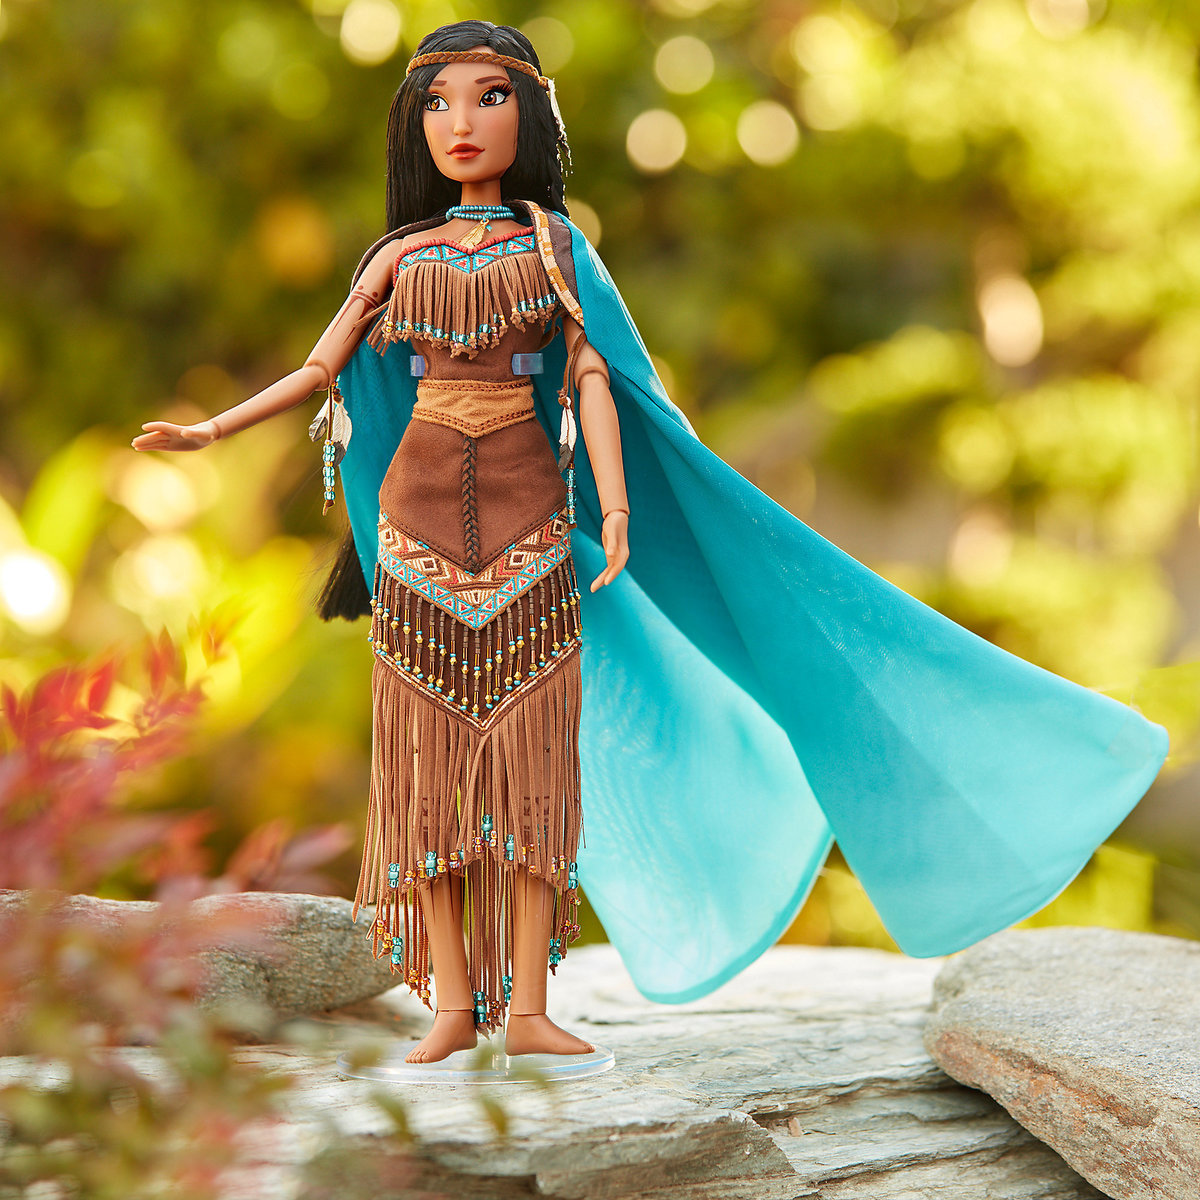 Disney’s Pocahontas Limited Edition Doll Out Now